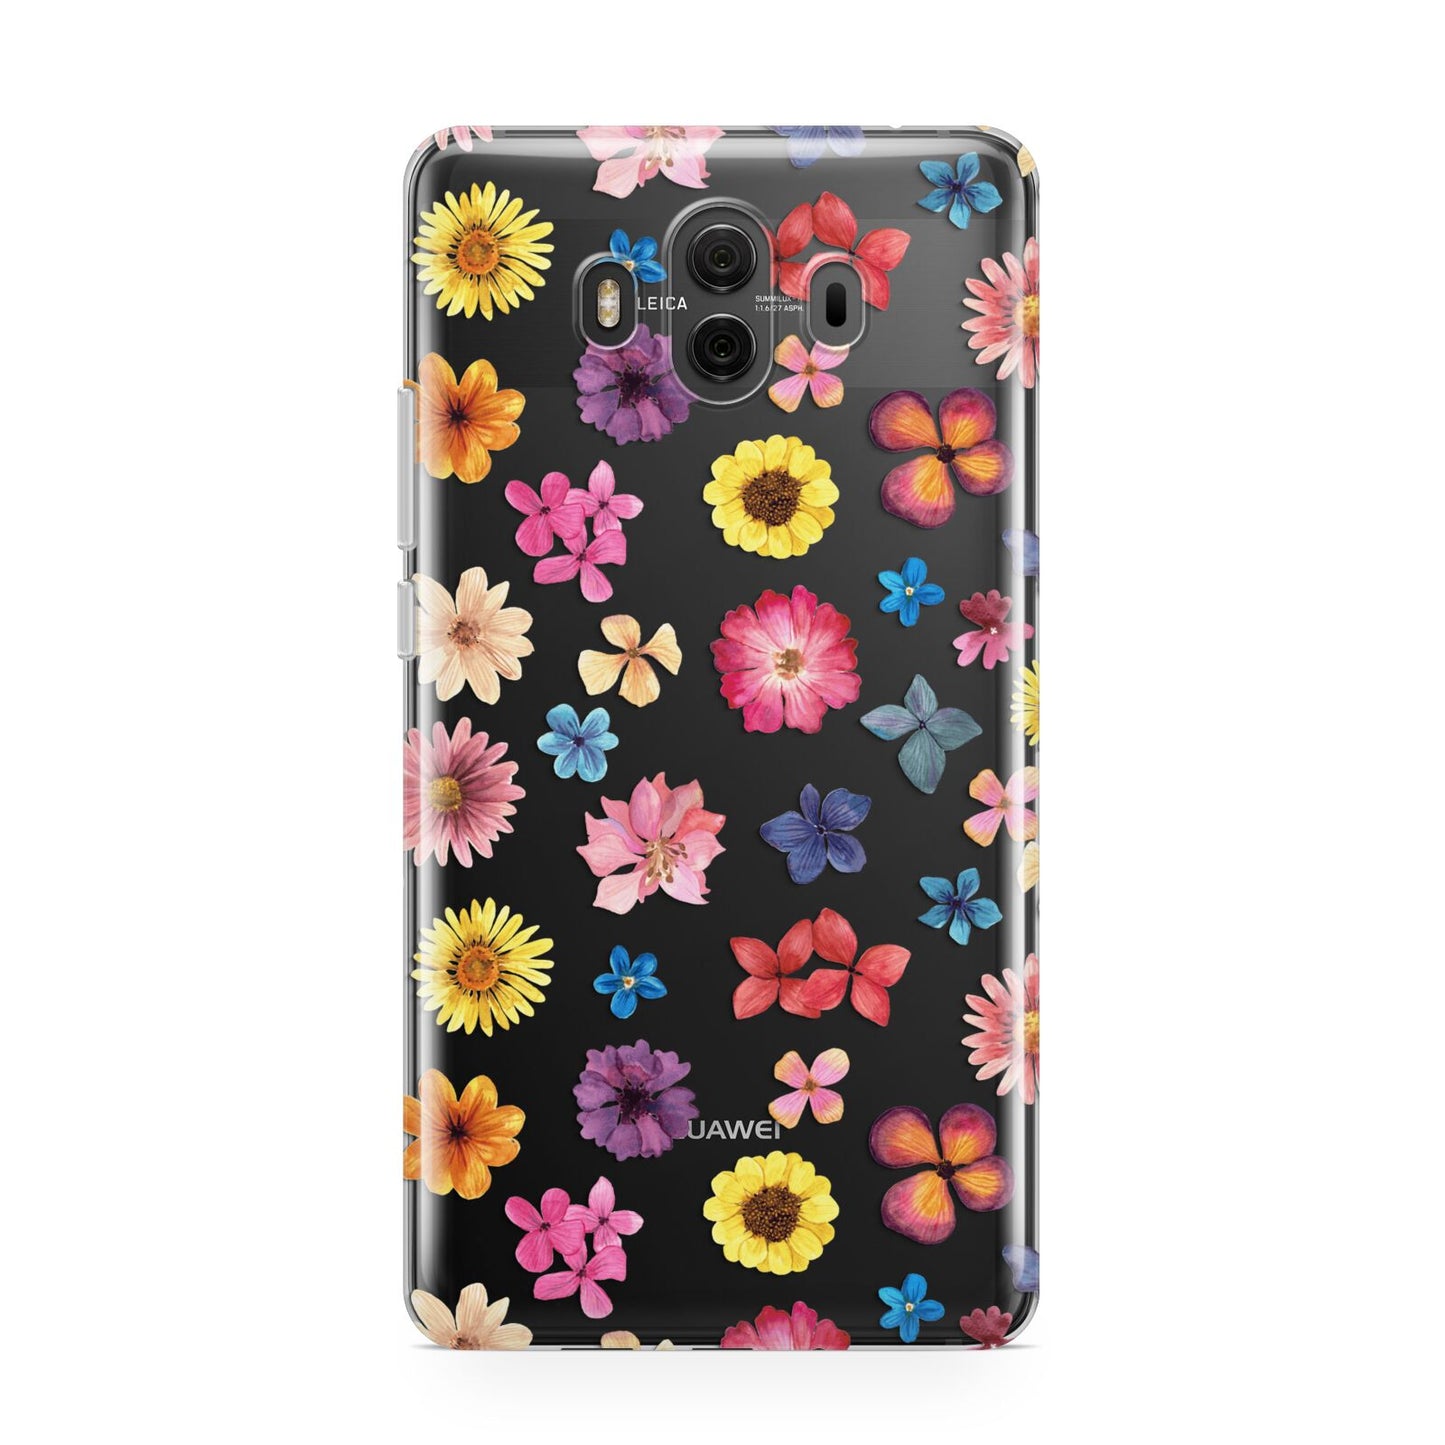 Summer Floral Huawei Mate 10 Protective Phone Case